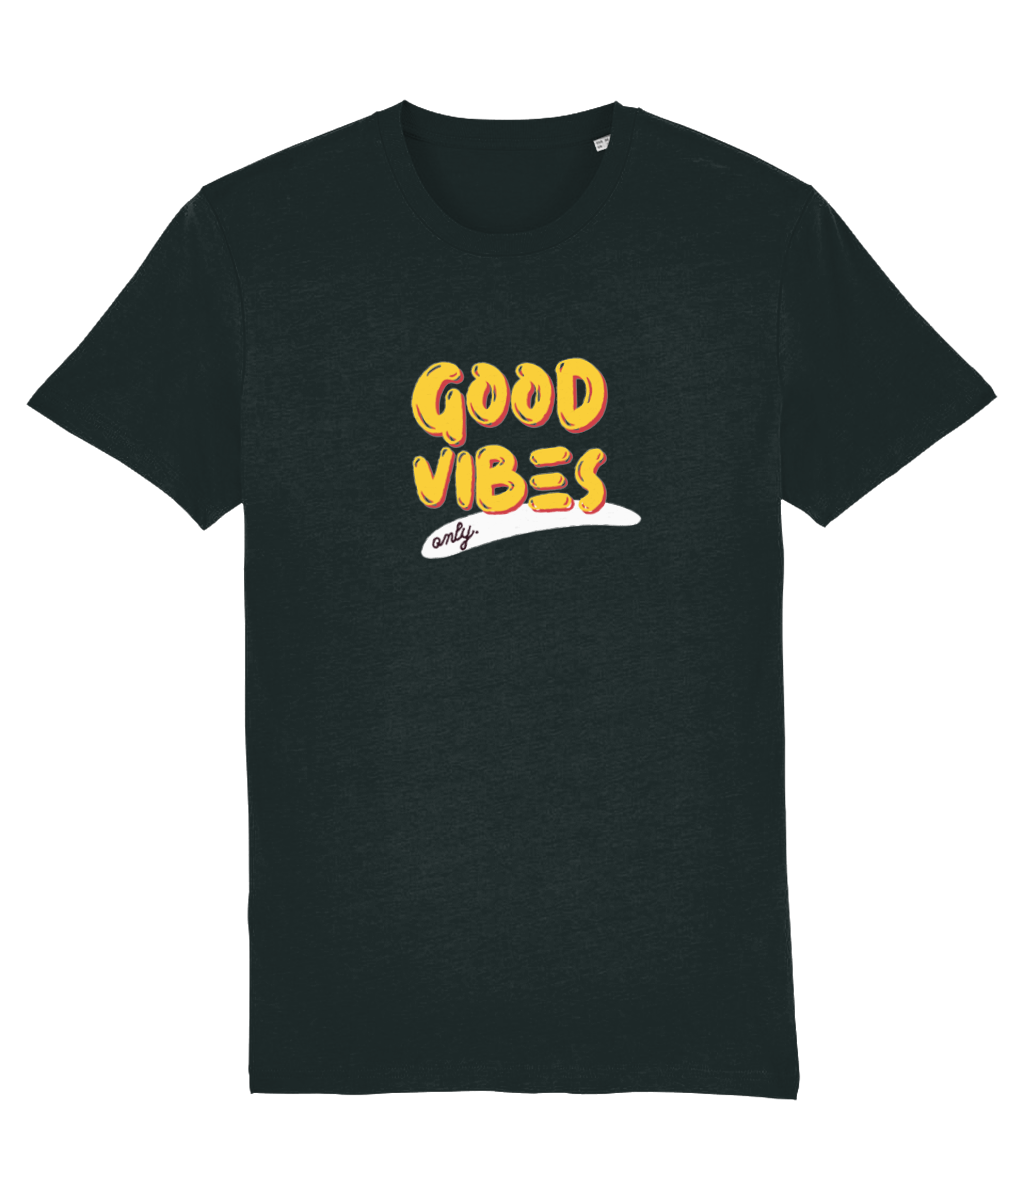 Good Vibes Only - T-shirt